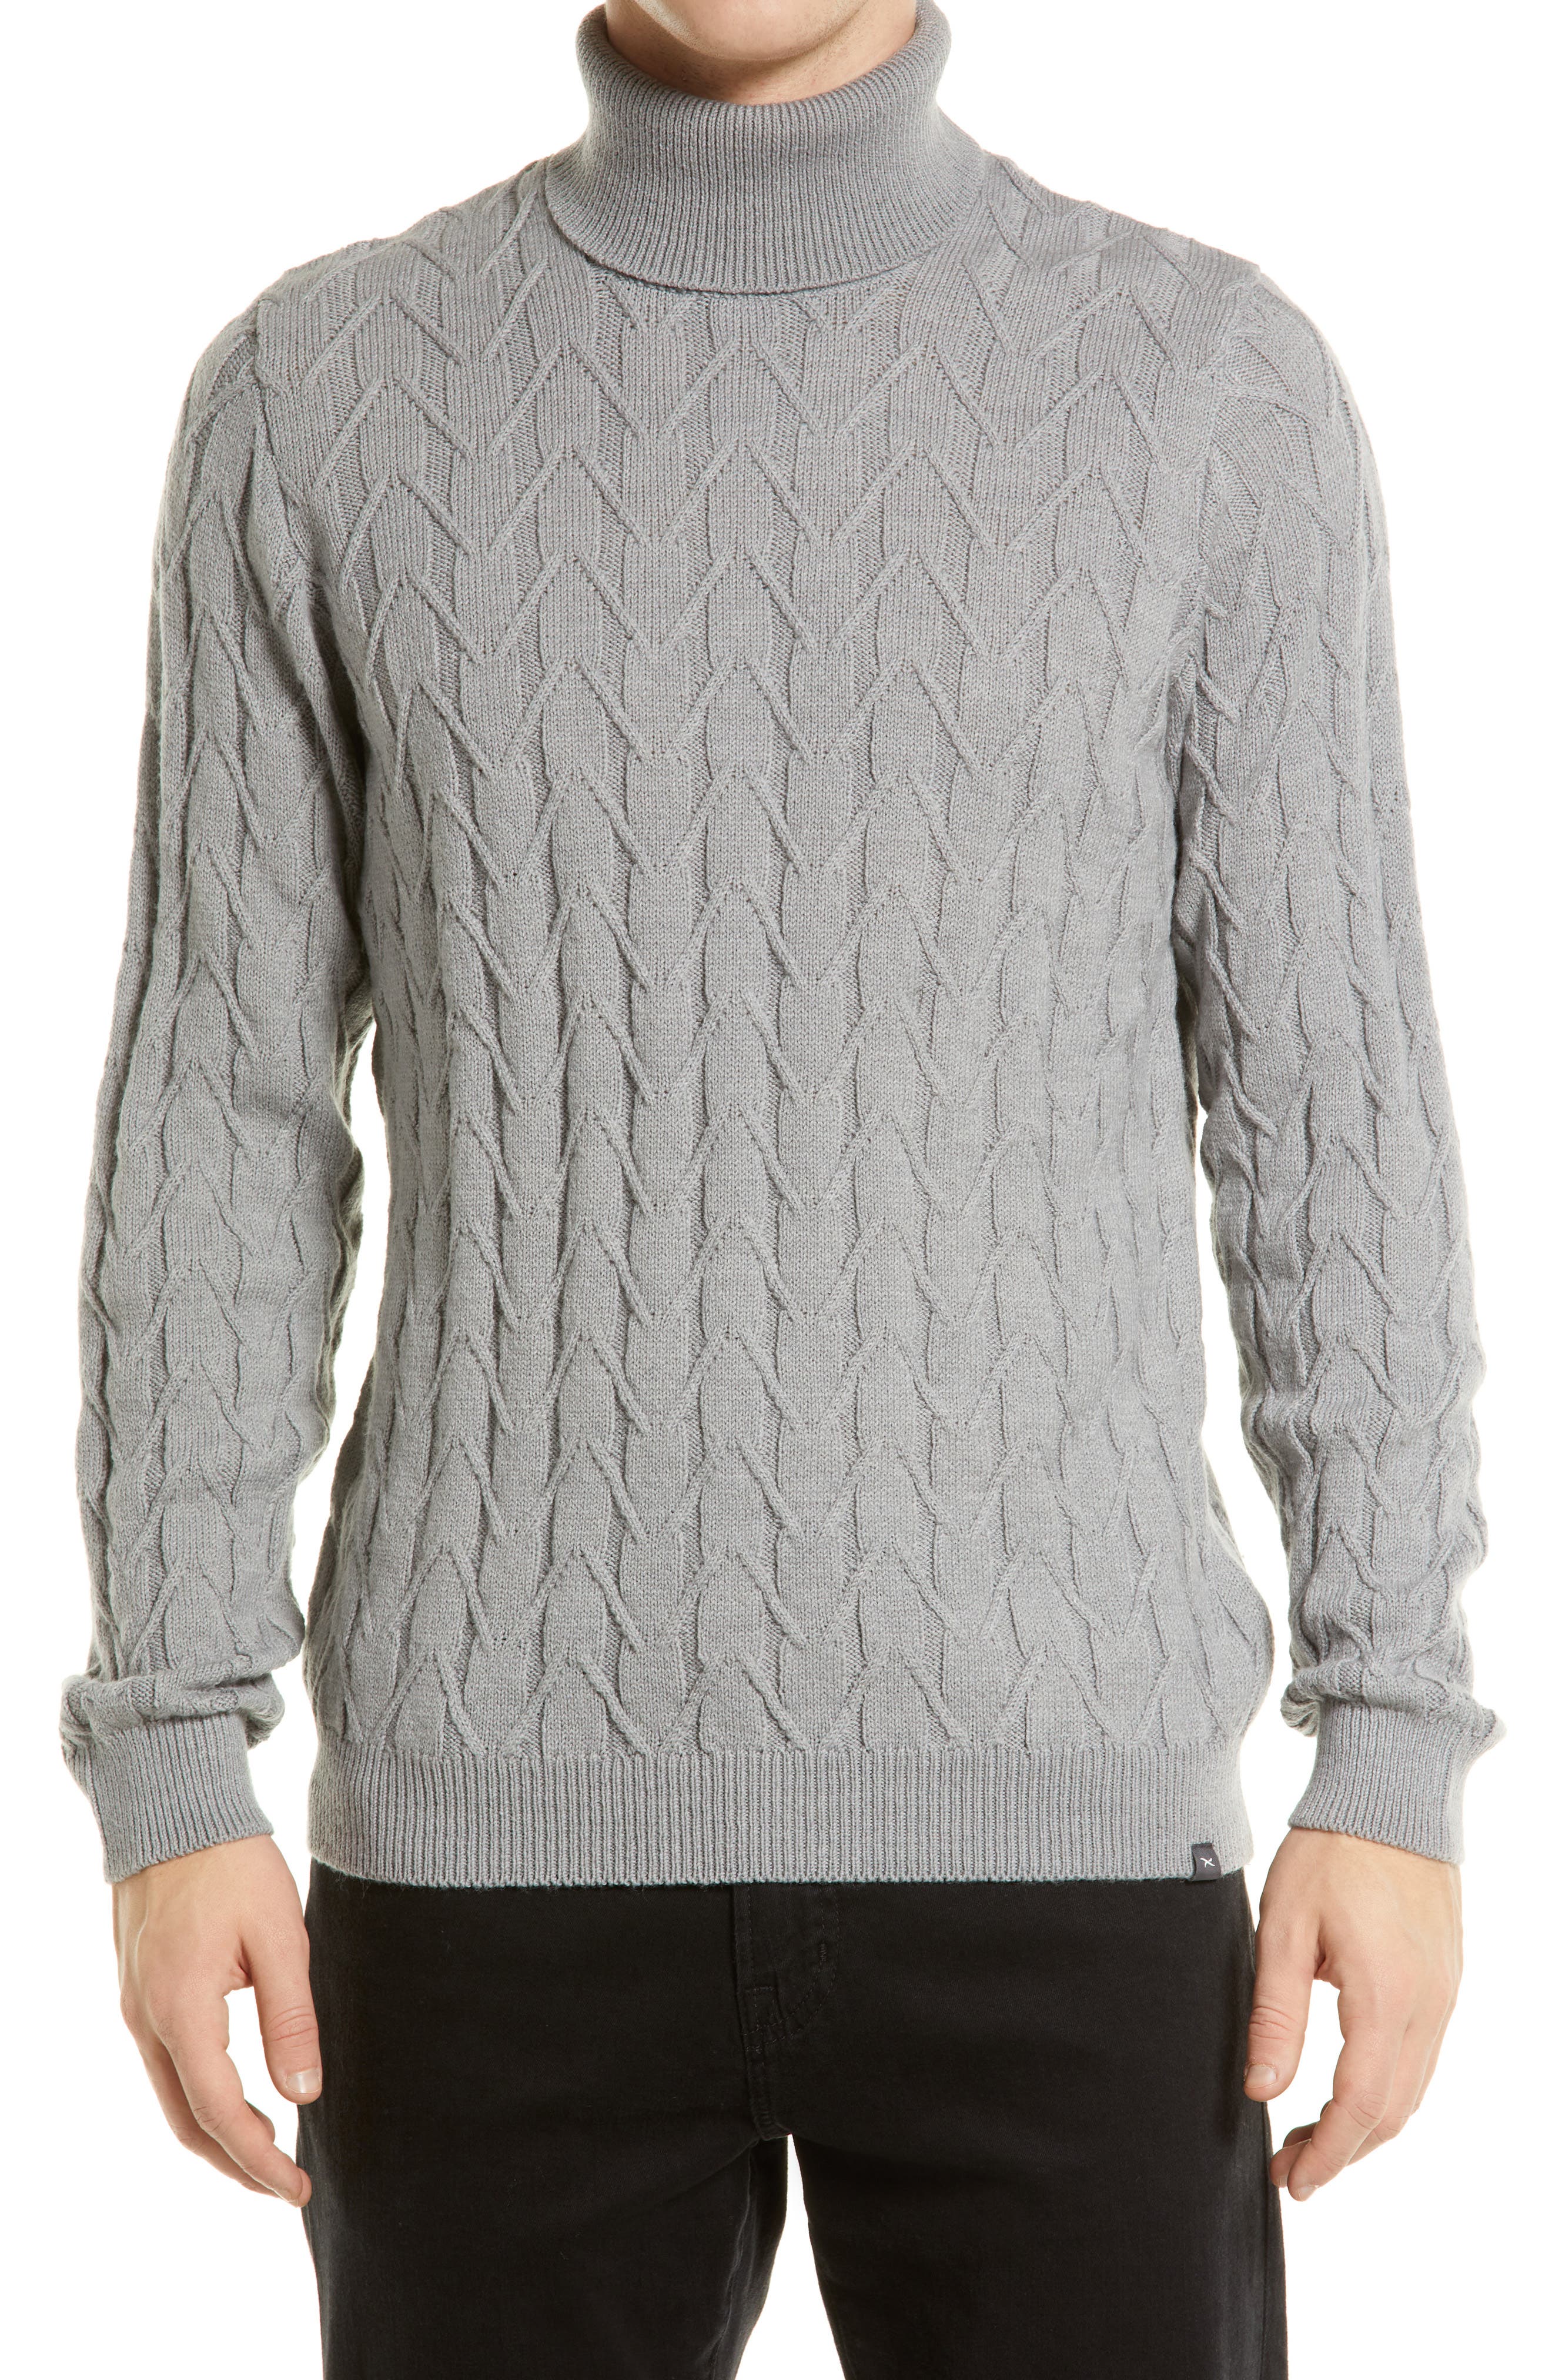 Etecredpow Mens Jumper Classic-fit Mock Turtle Neck Pullover Slim Knitted Sweaters 